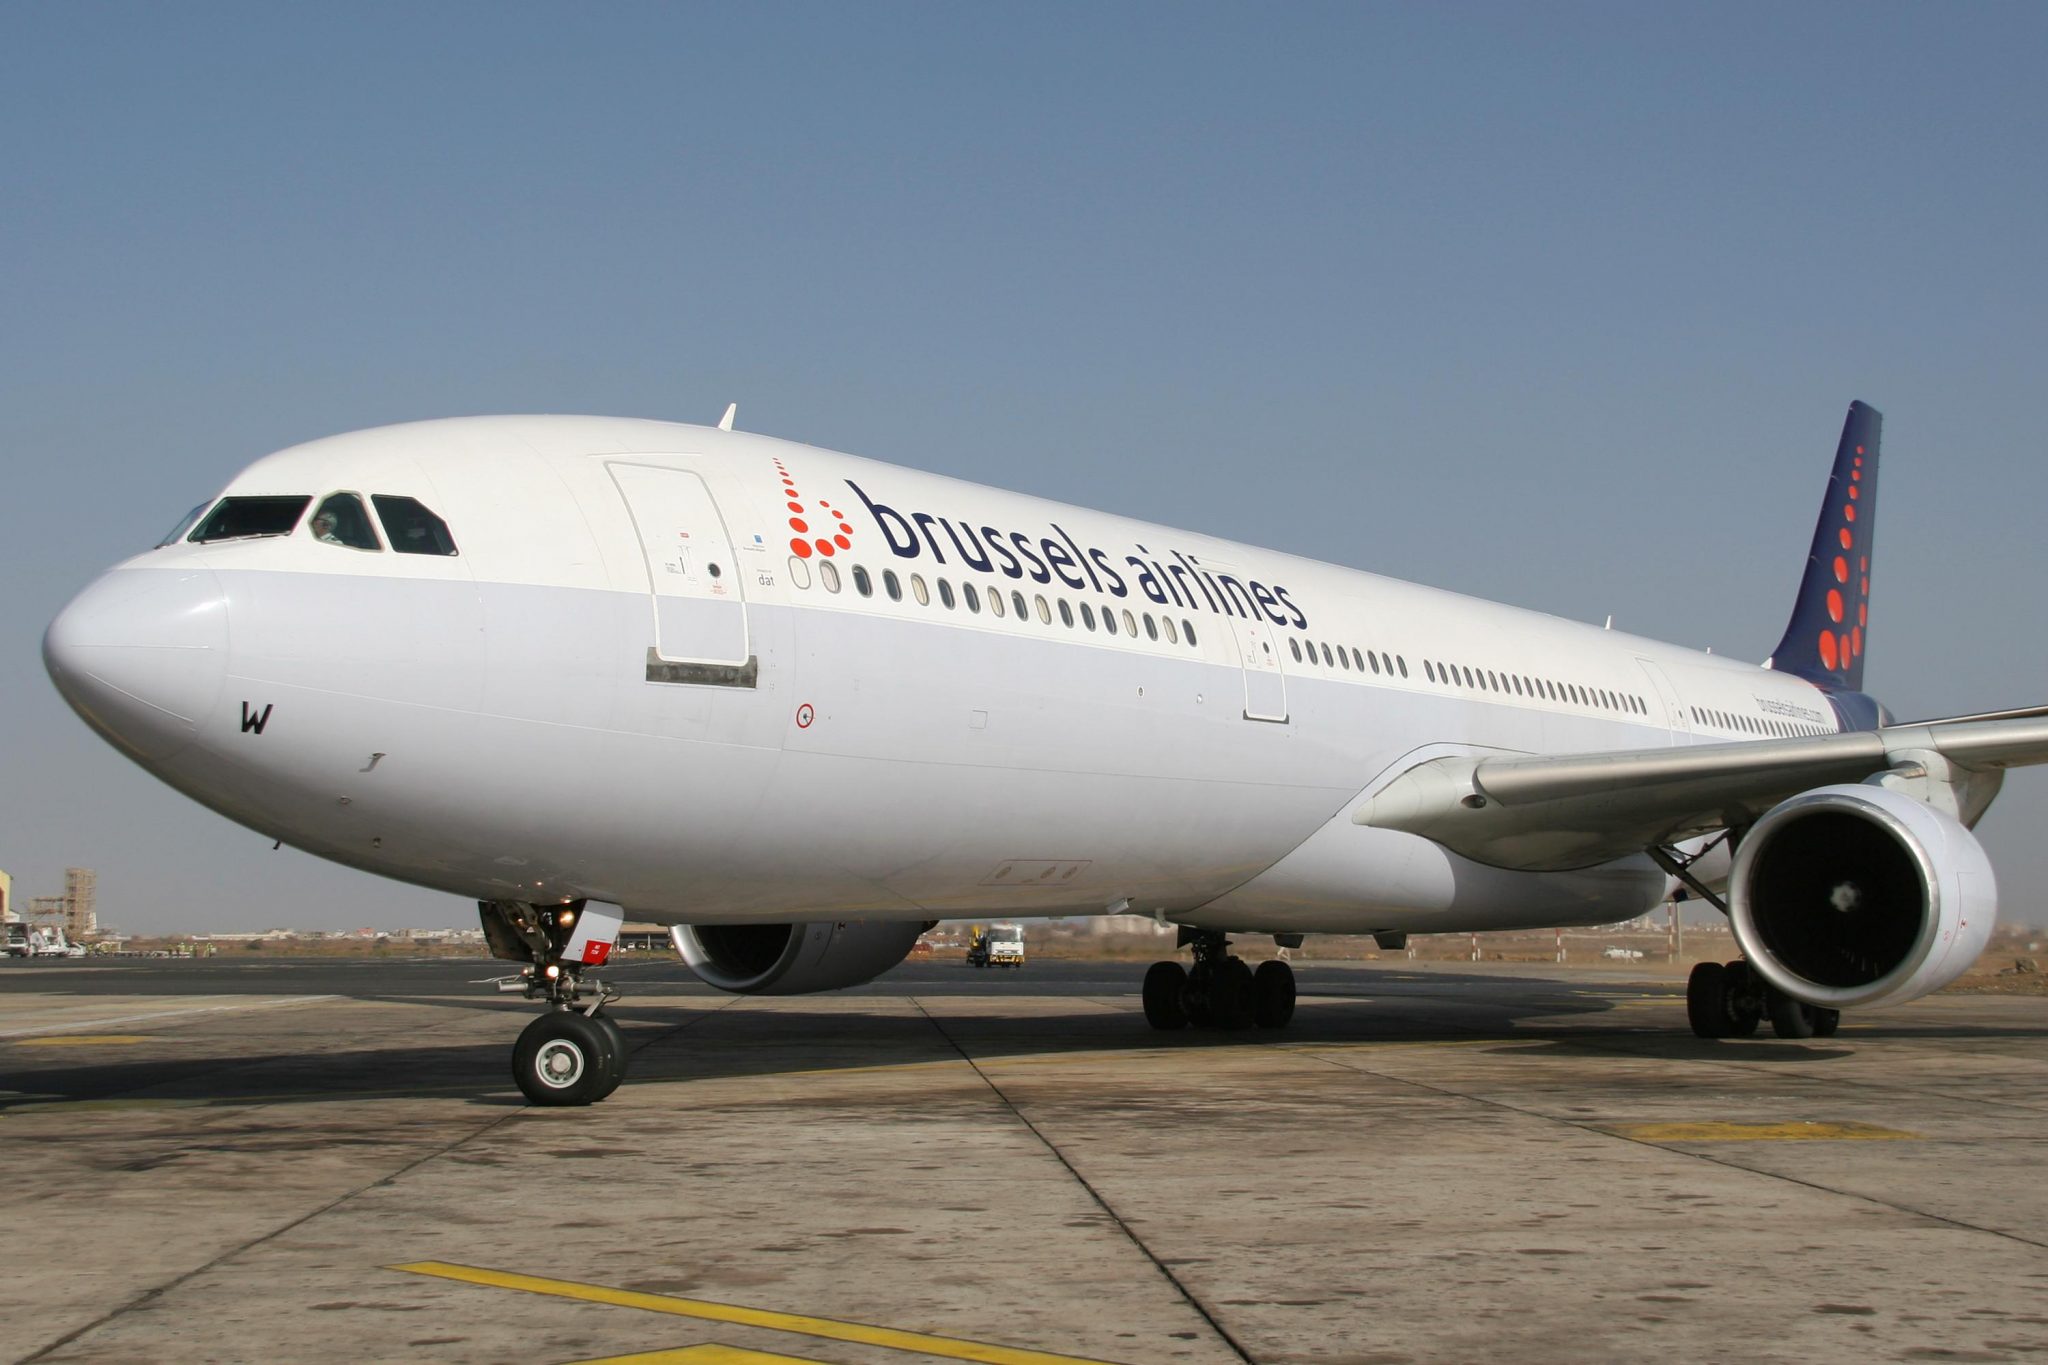 Brussels Airlines expands its winter schedule